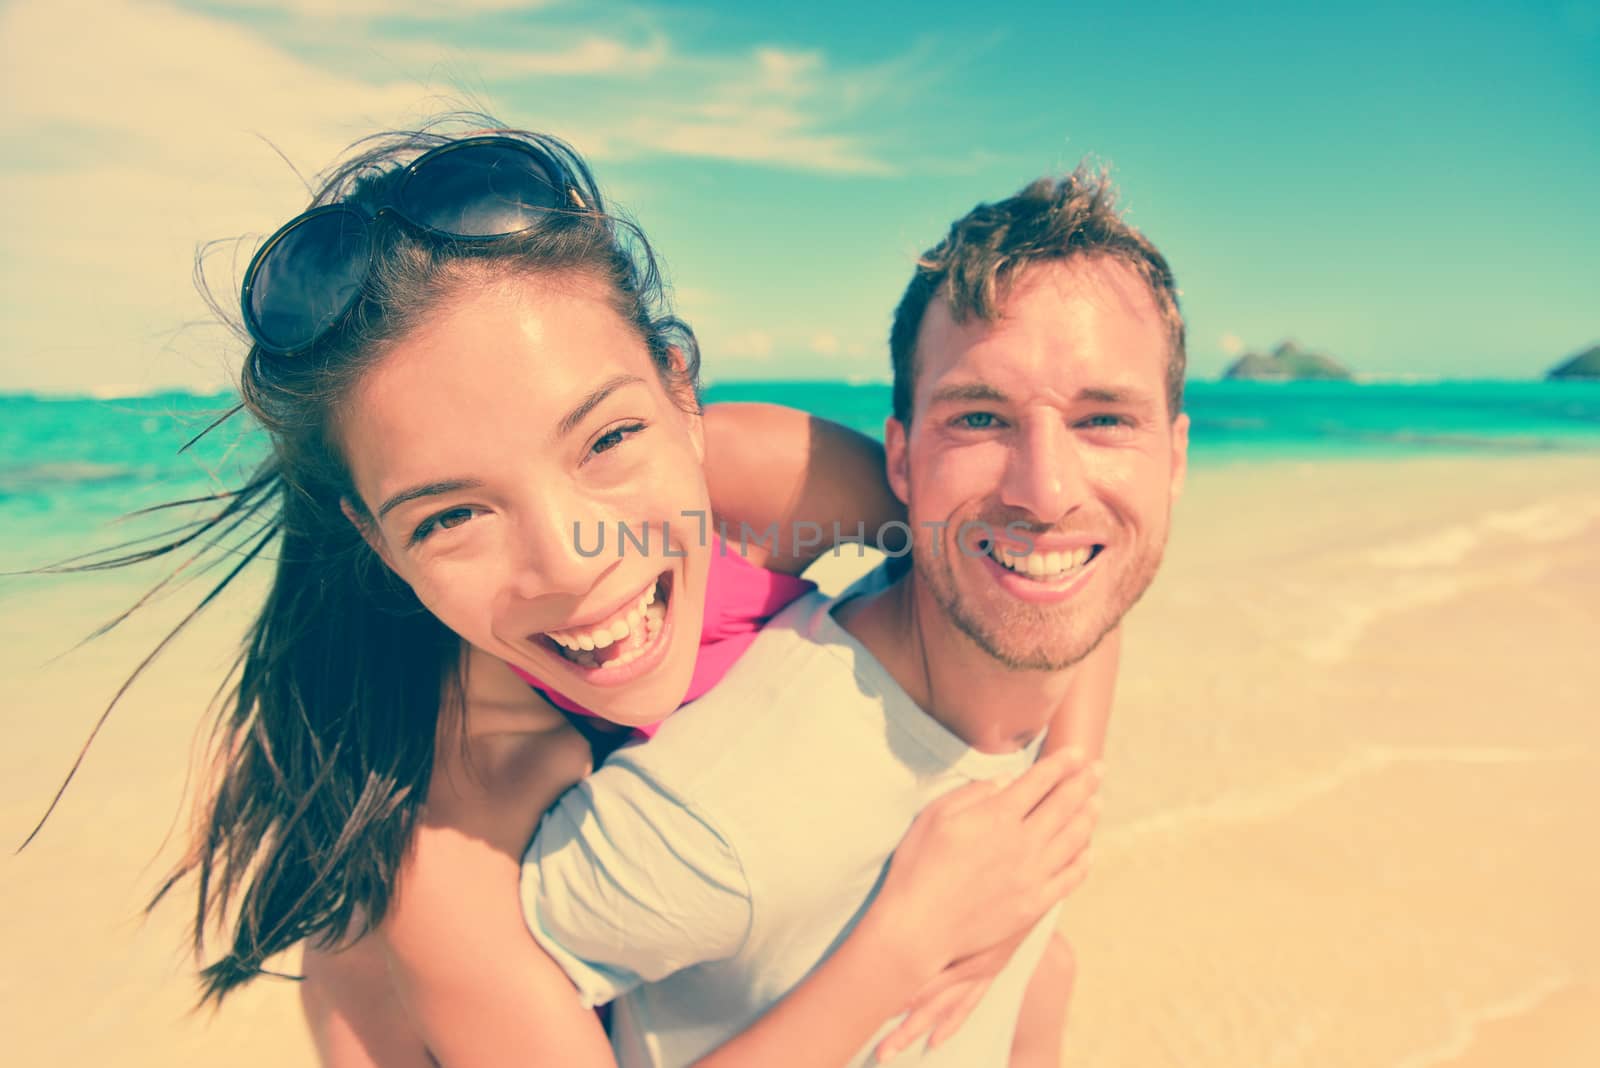 Portrait of happy young man giving piggyback ride to woman at beach. Excited couple are enjoying their summer vacation. Multiethnic tourists are having fun on shore.